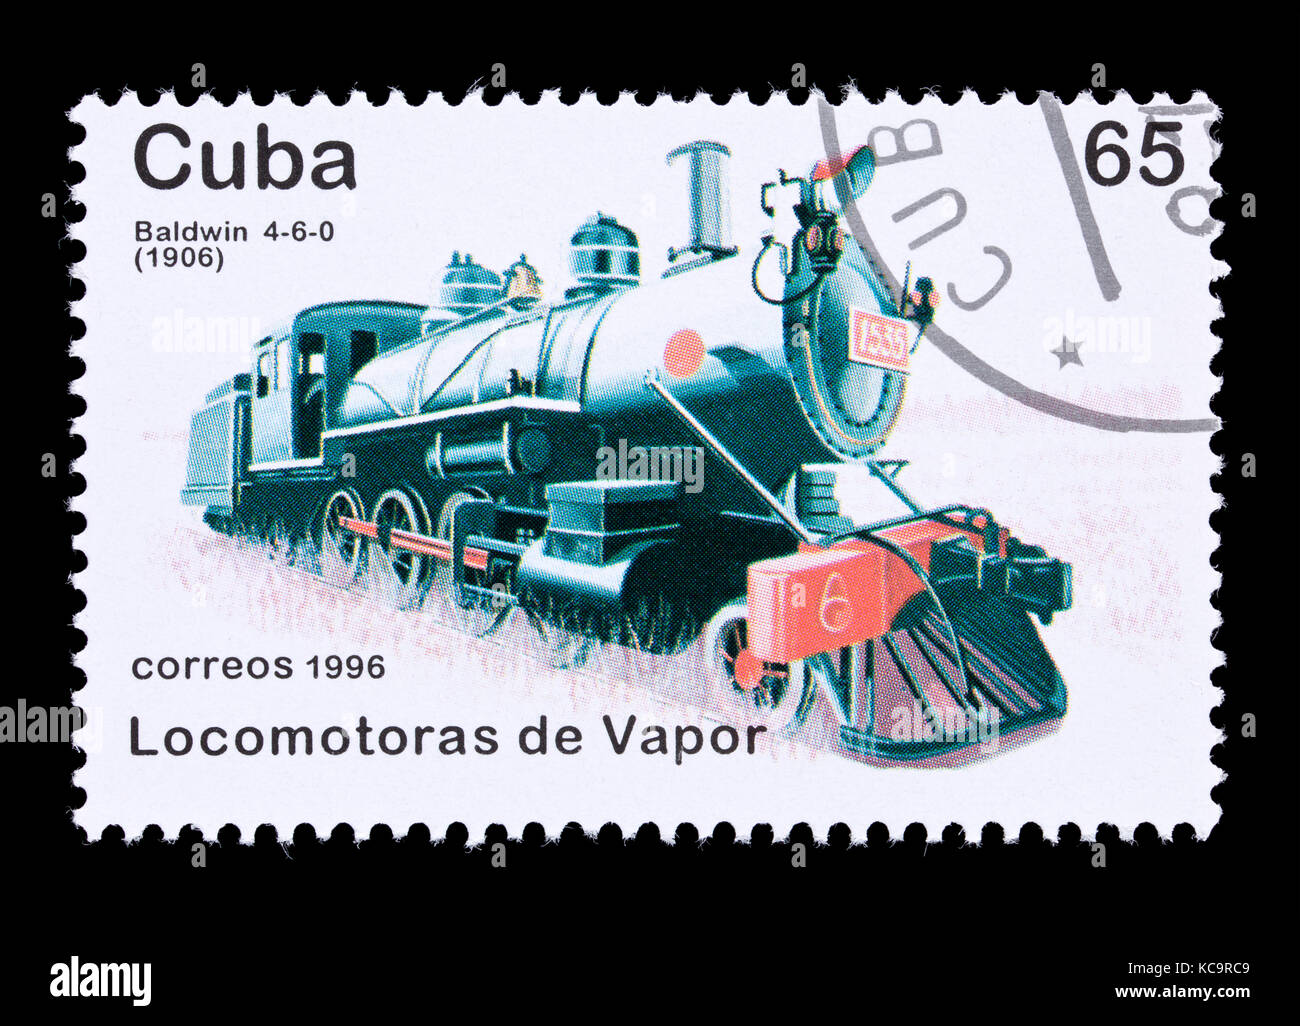 Postage stamp from Cuba depicting a Baldwin 4-6-0 steam locomotive from 1906. Stock Photo